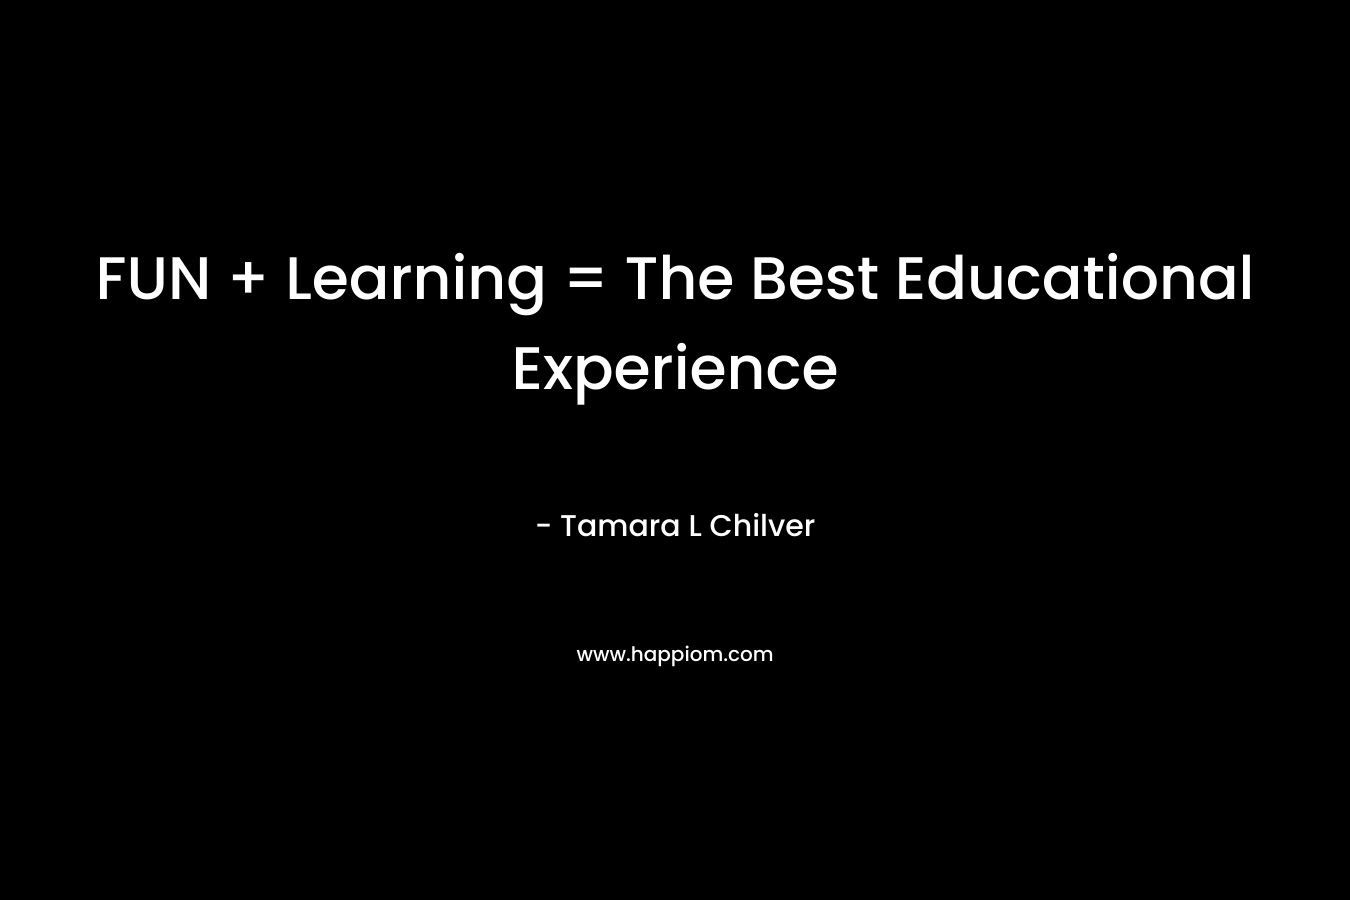 FUN + Learning = The Best Educational Experience